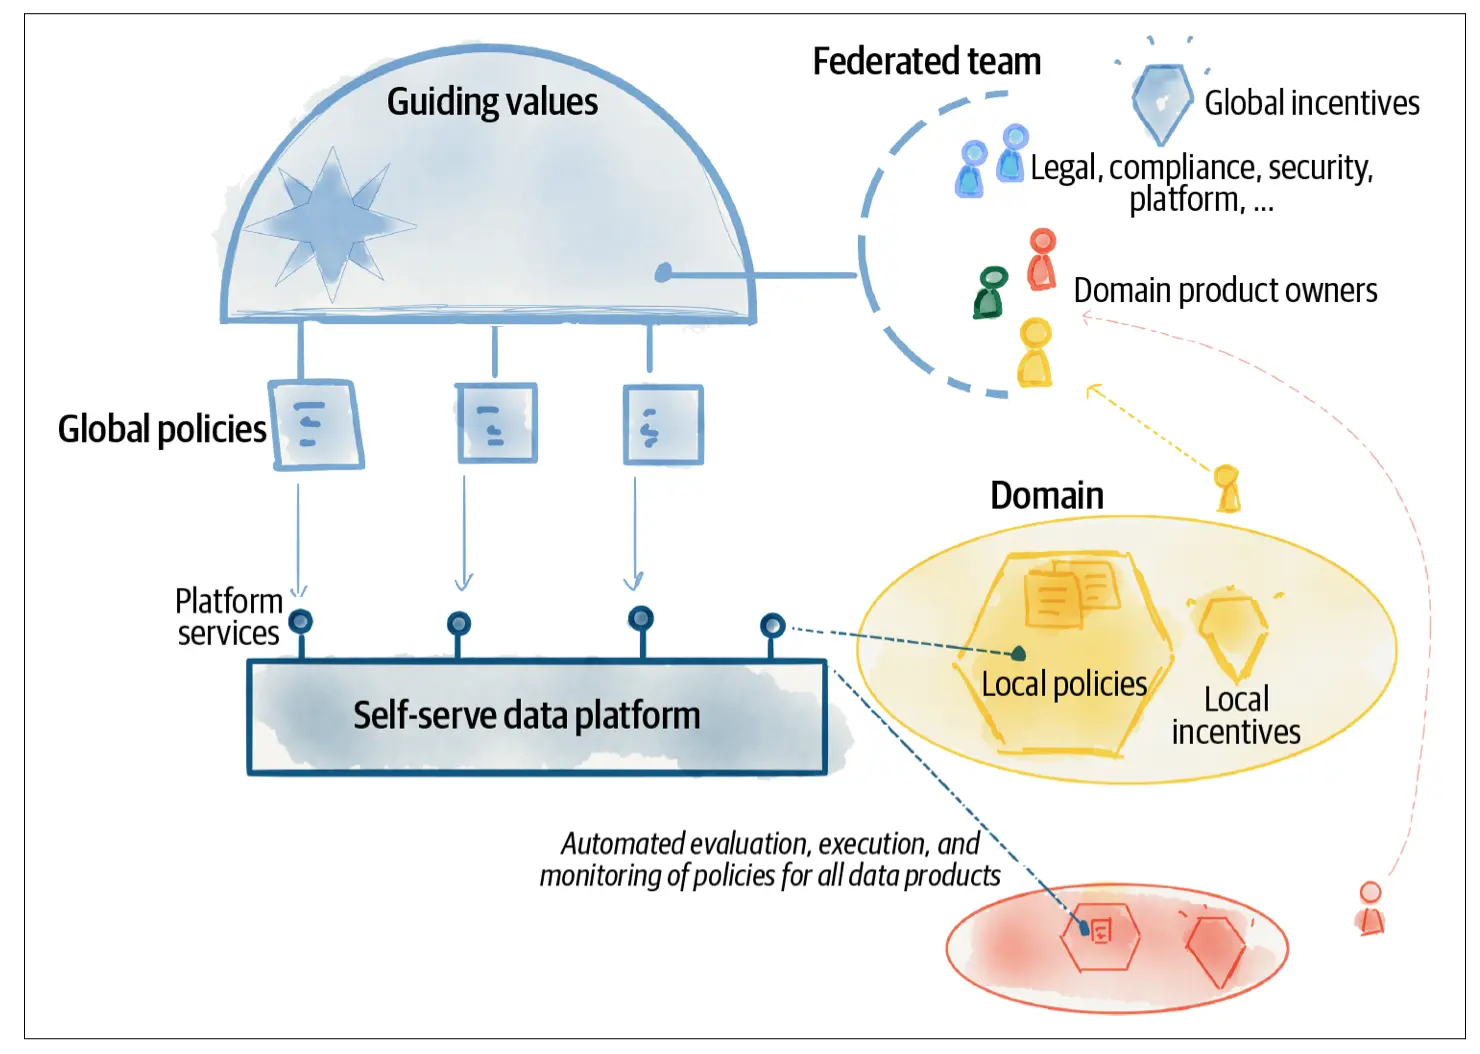 Operating elements of a federated computational governance model